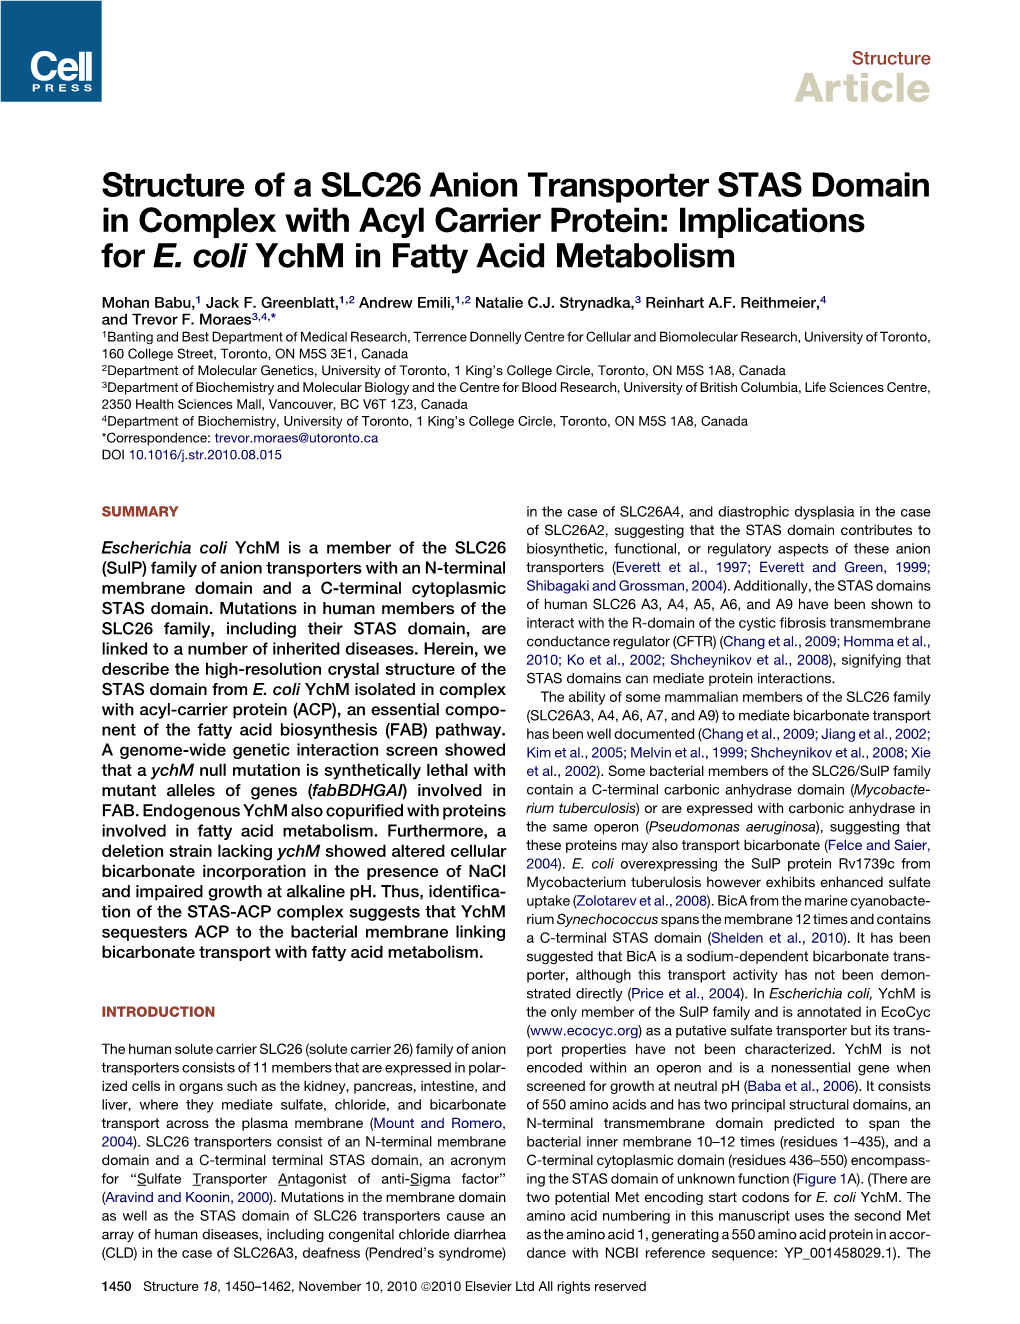 Structure of a SLC26 Anion Transporter STAS Domain in Complex with Acyl Carrier Protein: Implications for E